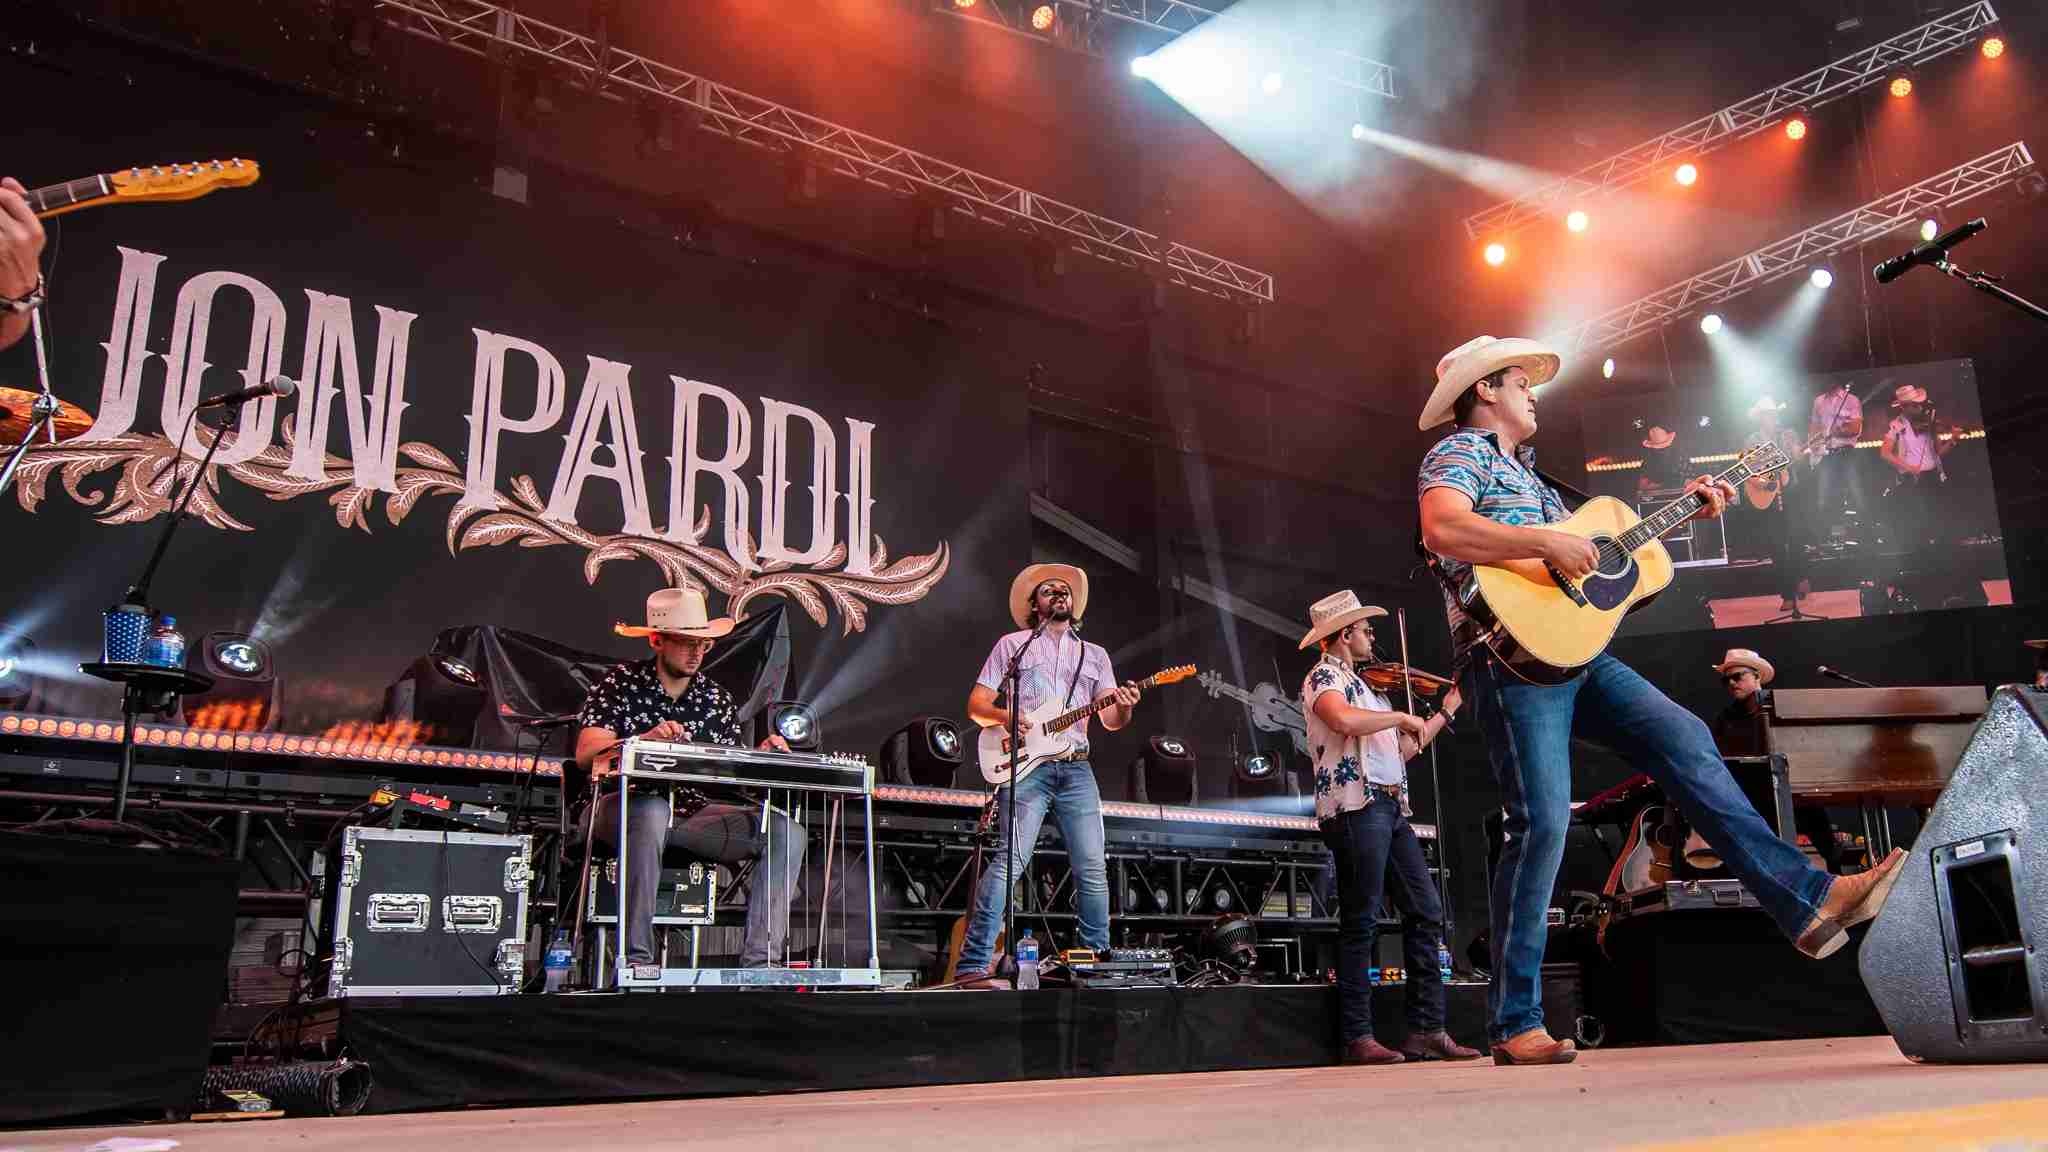 Concert: Jon Pardi, An American country music singer and songwriter, Live performance, Guitar band. 2050x1160 HD Wallpaper.